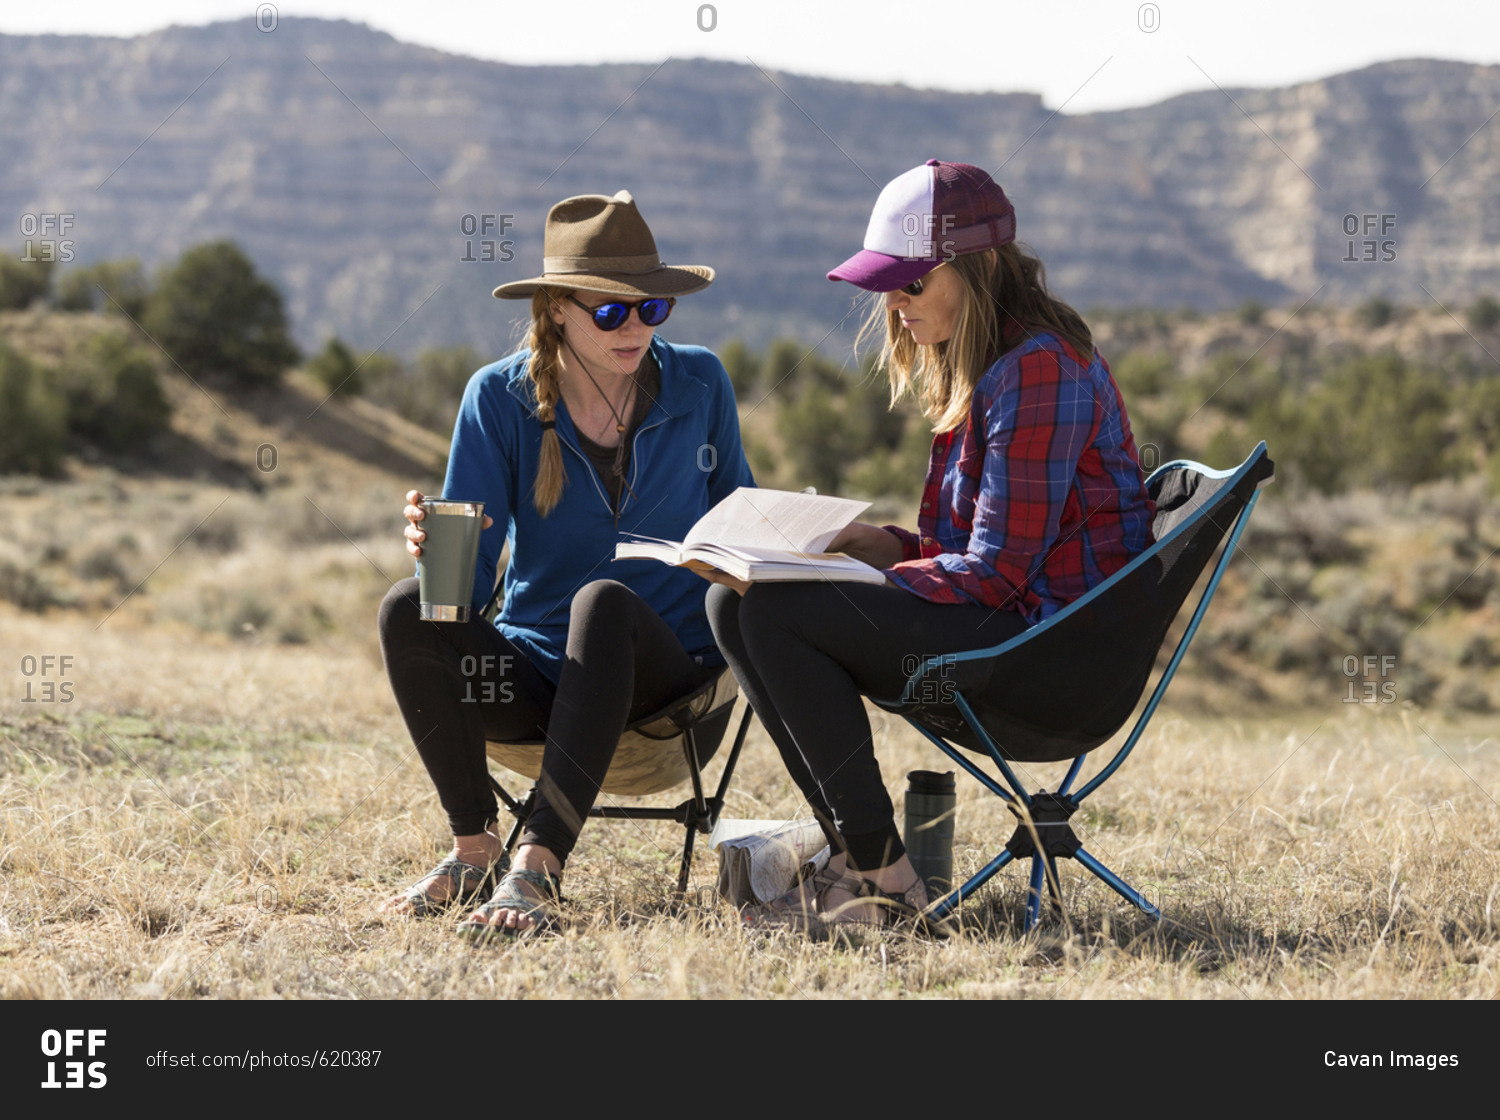 Female friends looking at book while sitting on camping chairs at field against mountains during sunny day